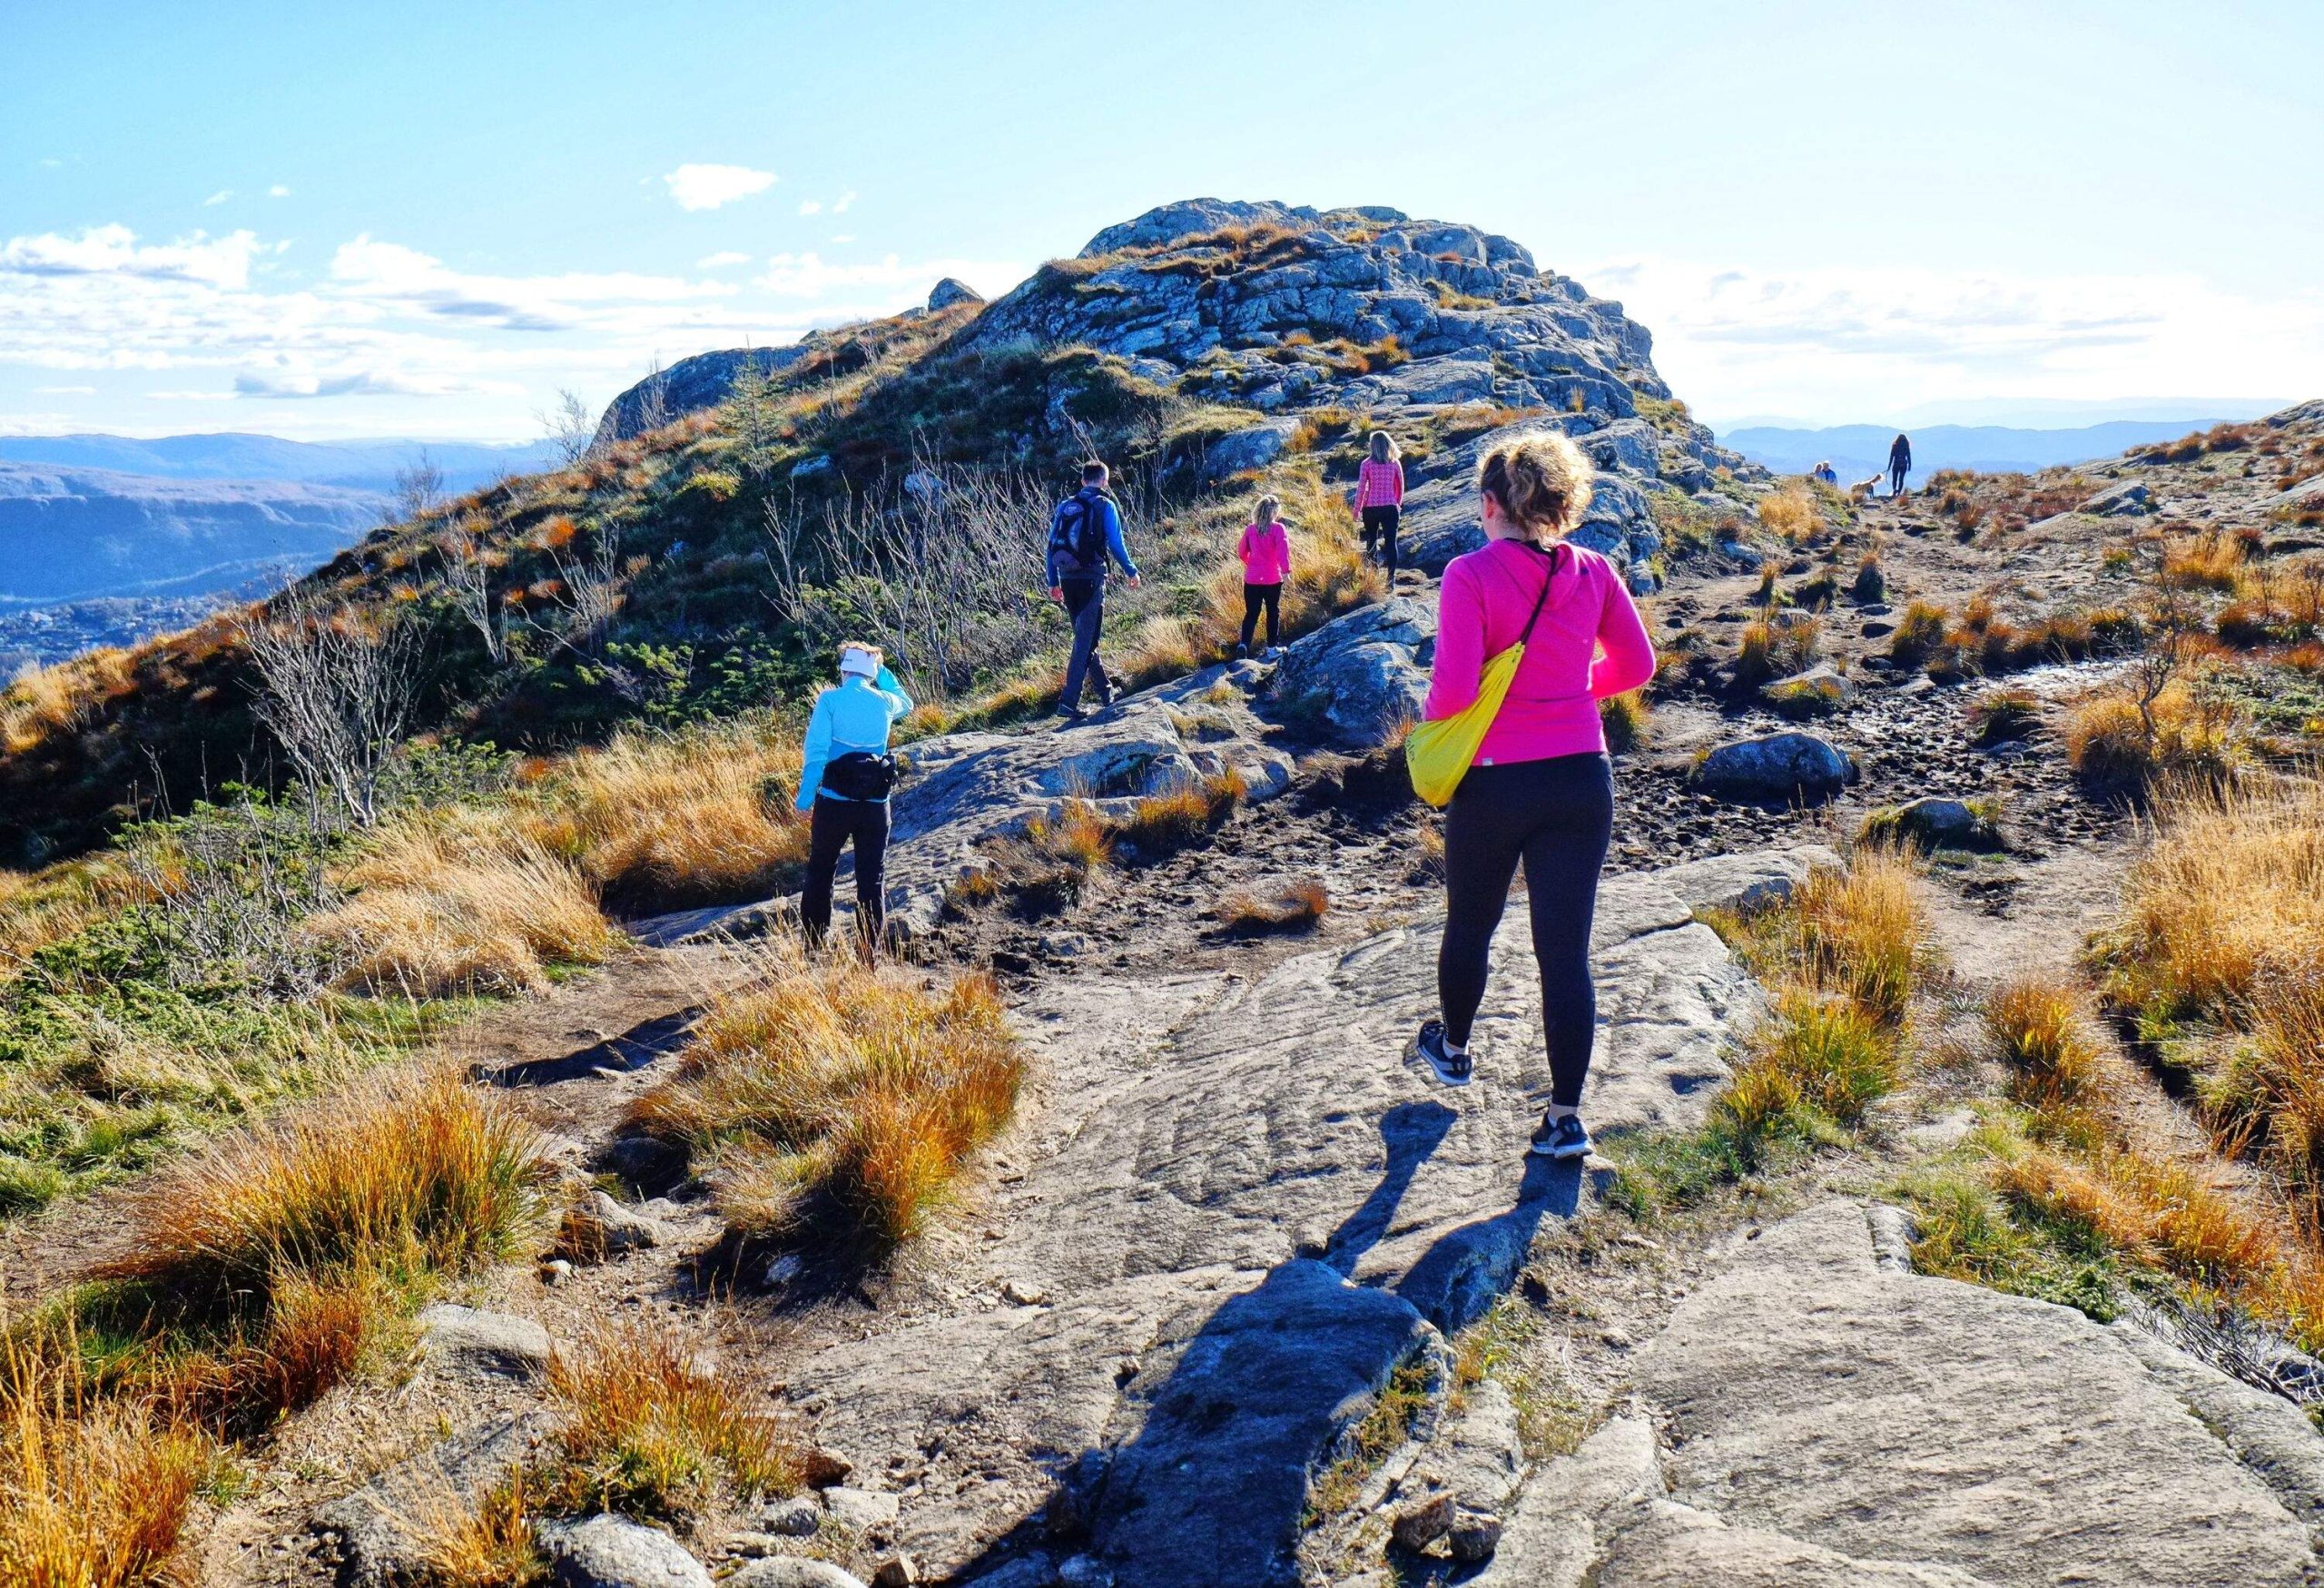 People in athletic clothing hike a mountain's rough terrain.